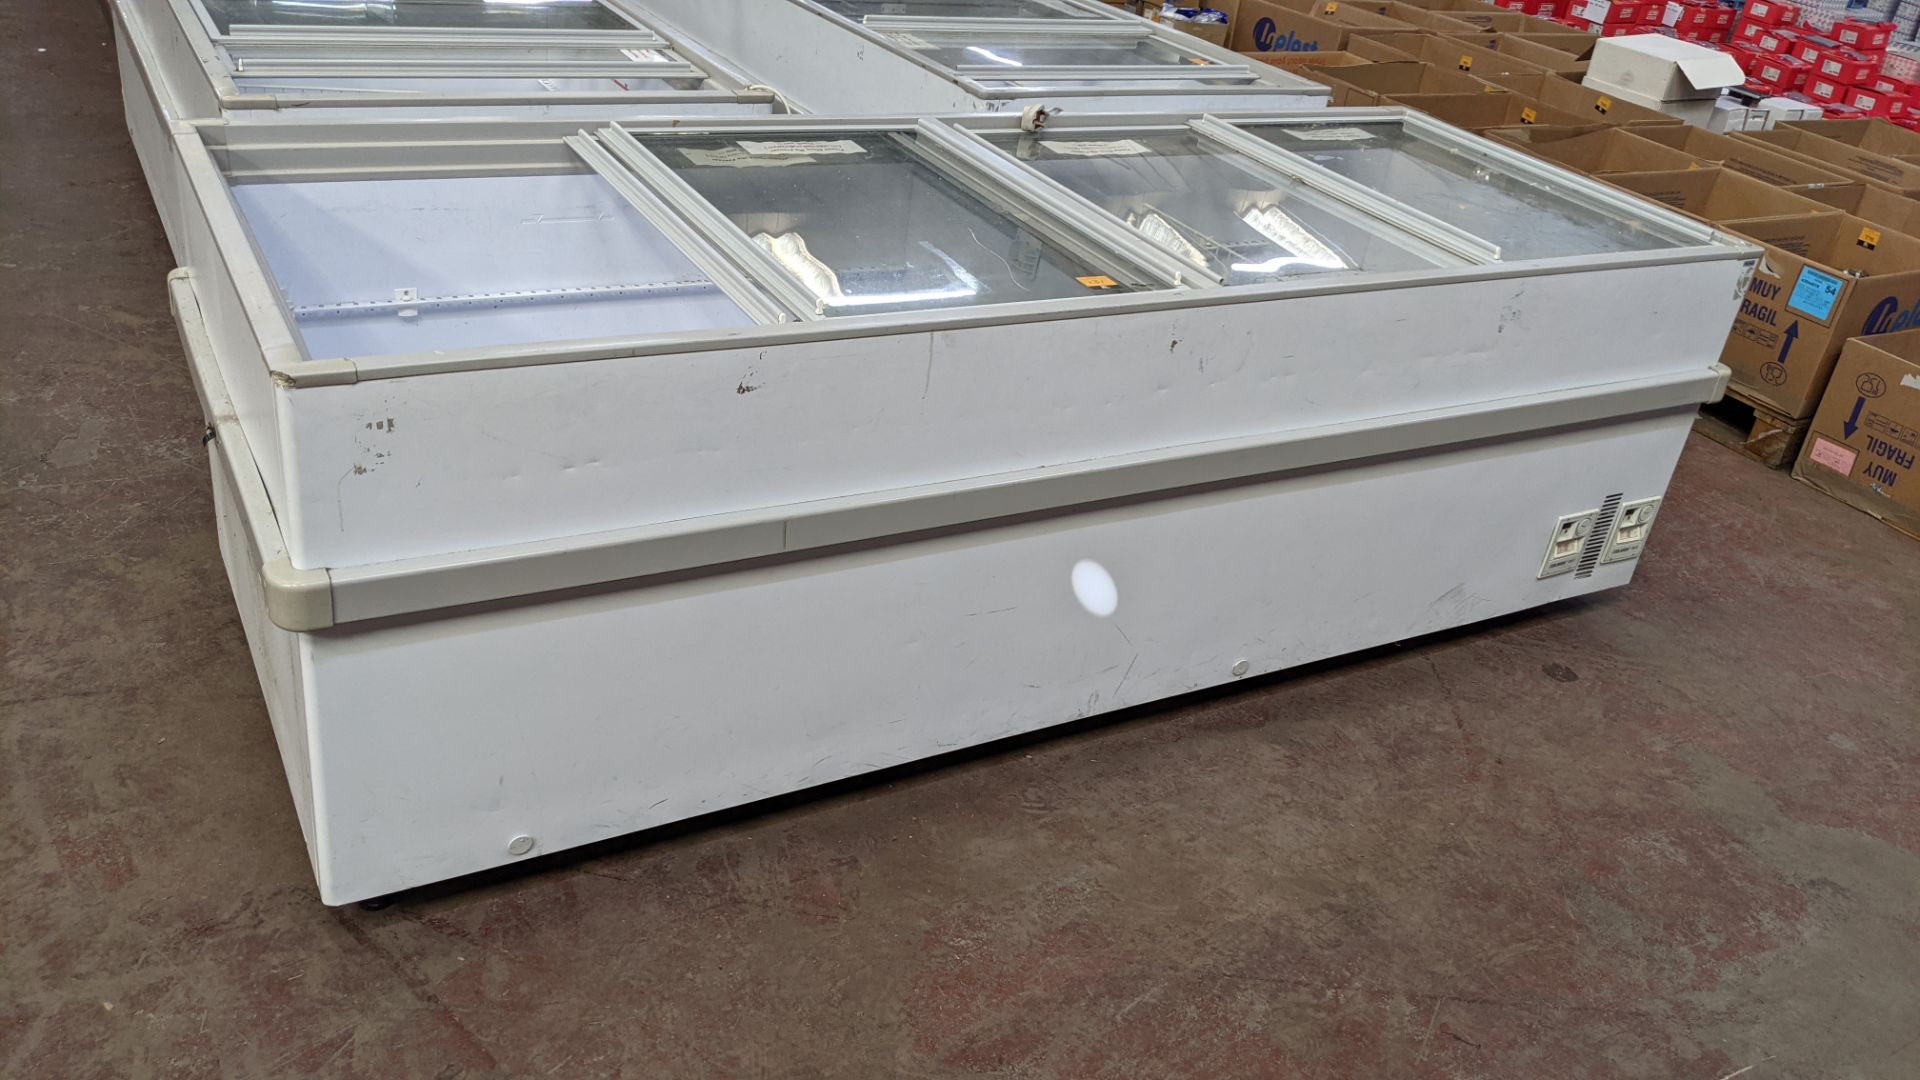 Very large chest freezer with 4 section clear top. Overall dimensions circa 2455mm x 910mm